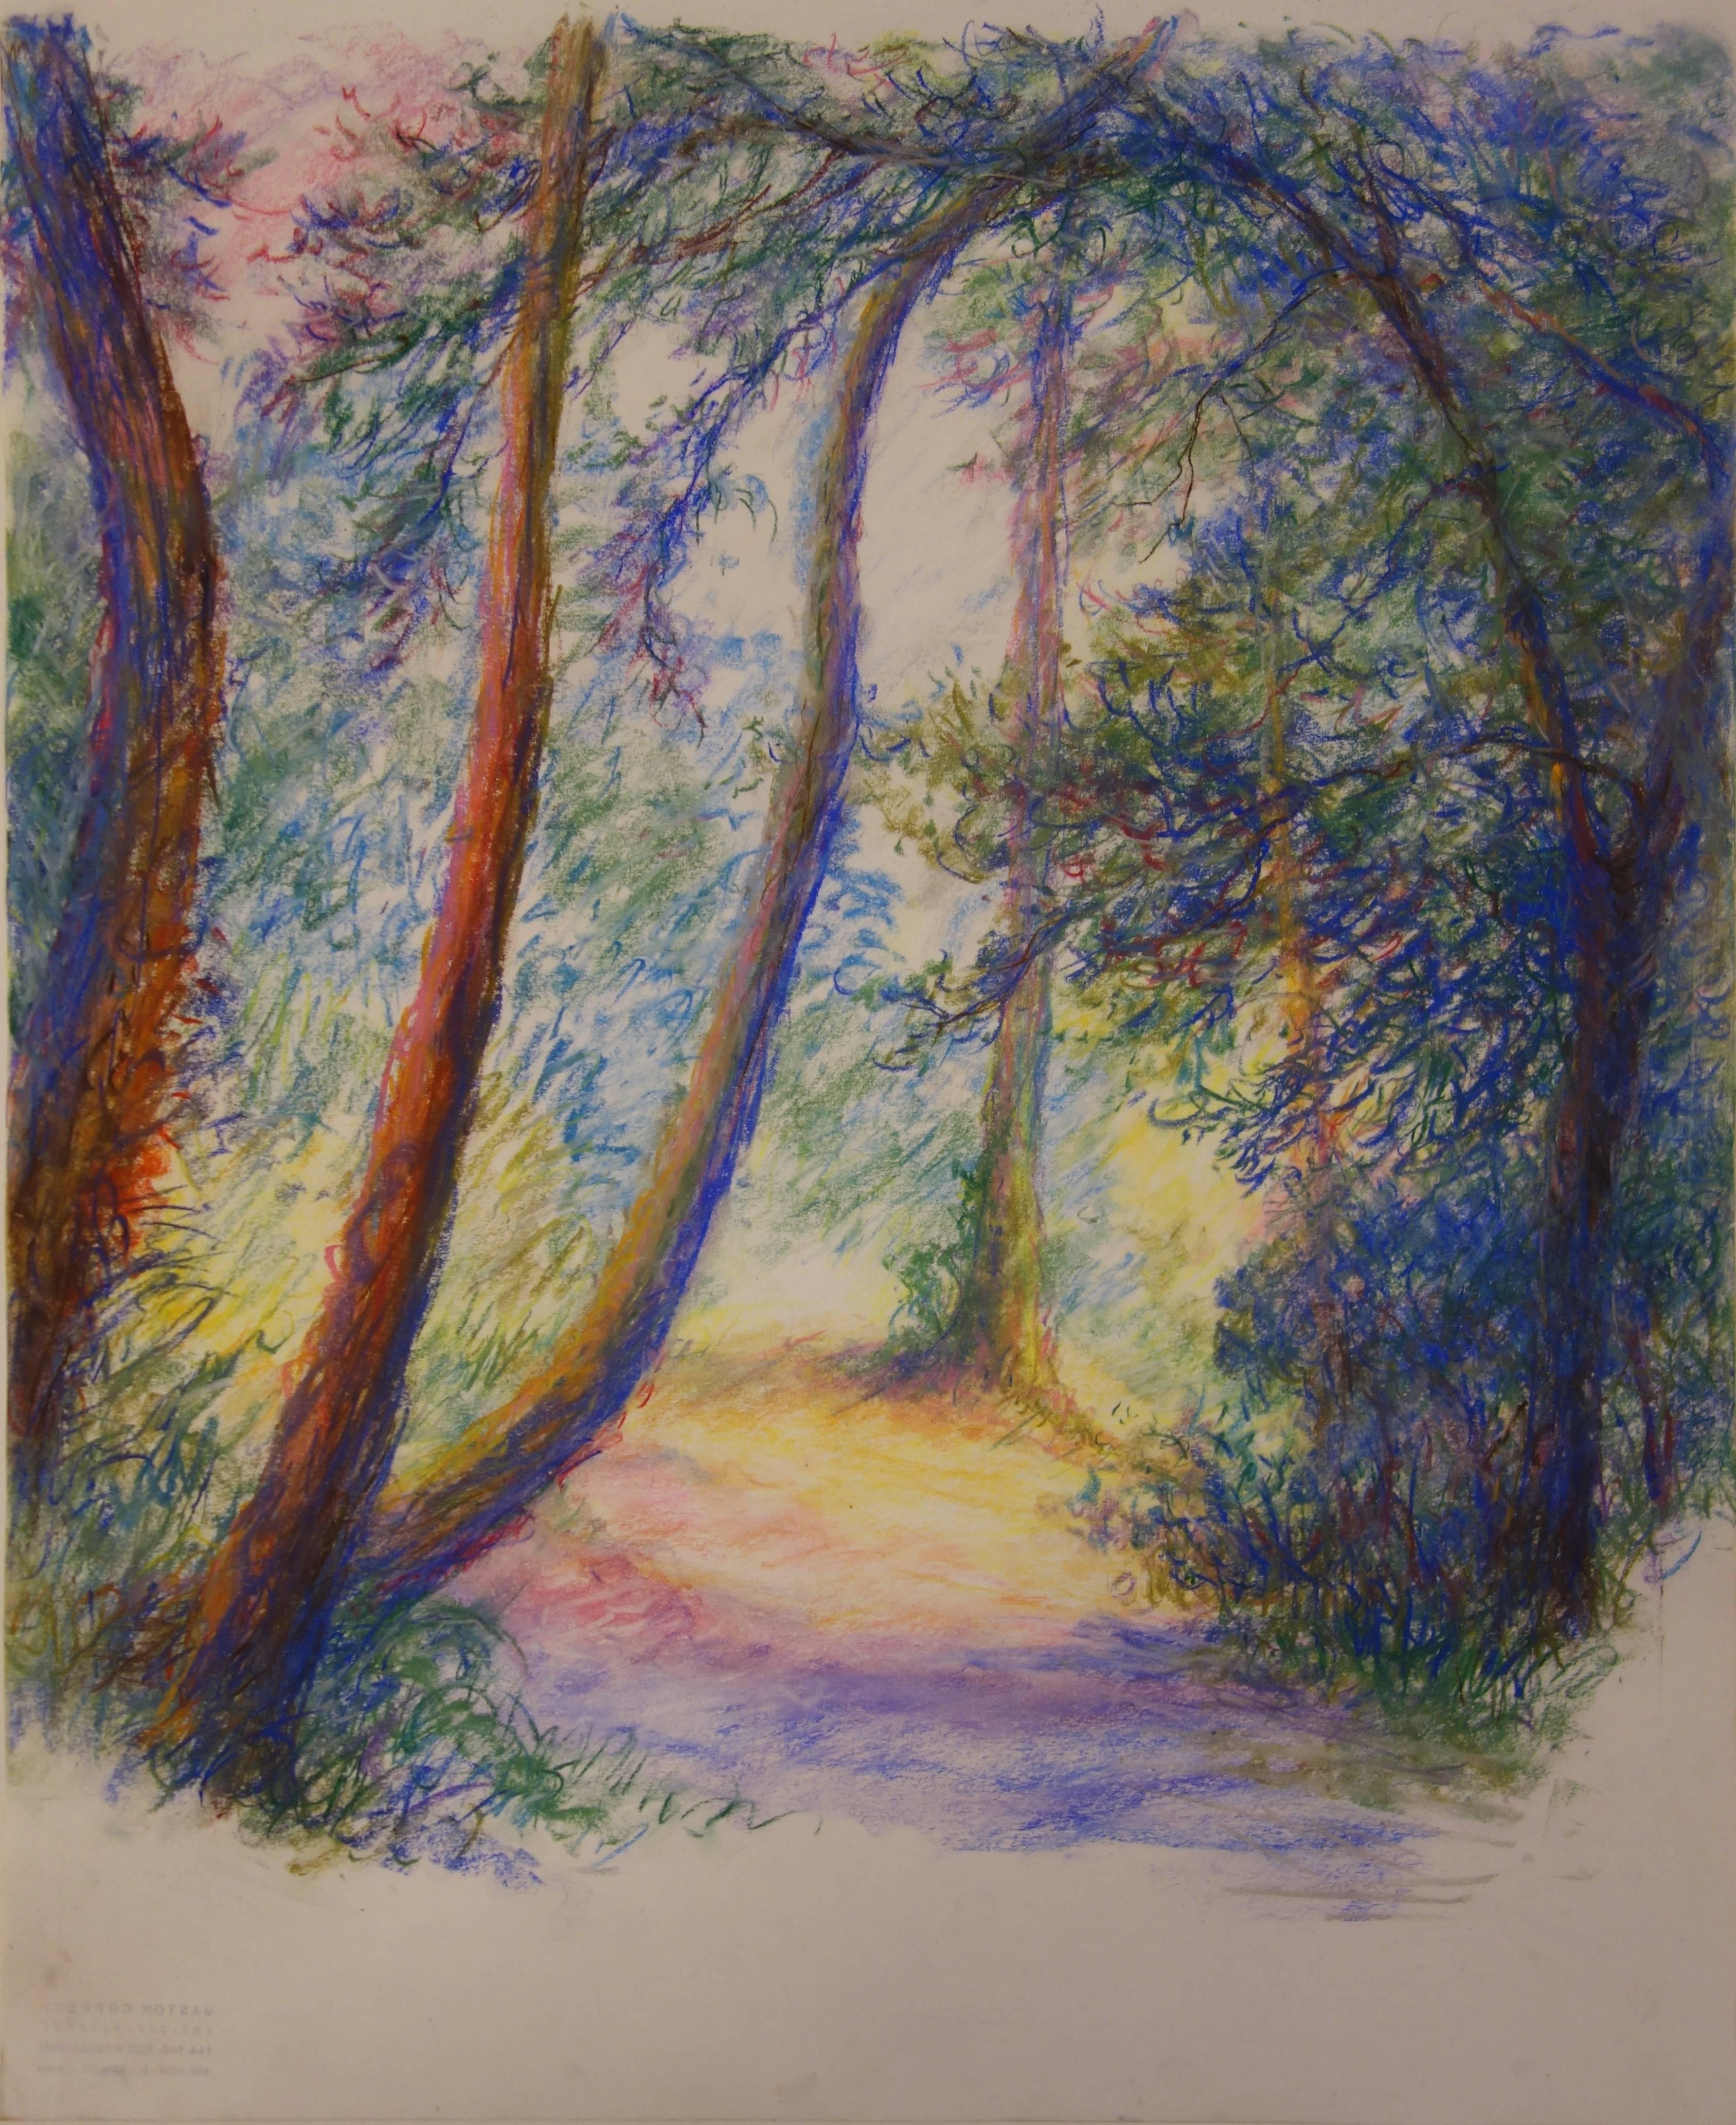 First Hours of the Day in the Woods - Original charcoals drawing